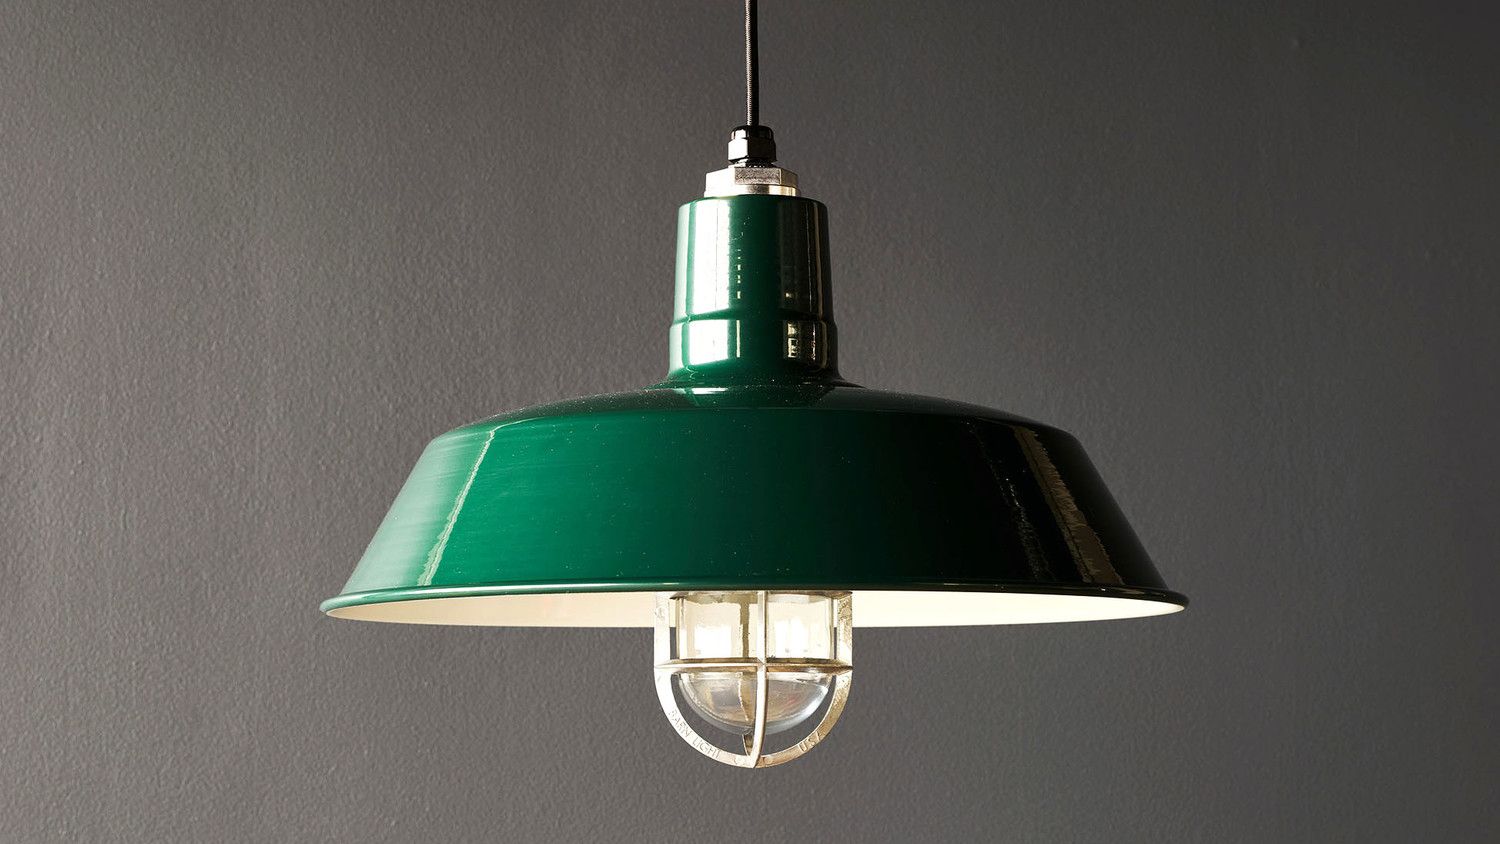 Special Prices On Nisbet 6 Light Lantern Geometric Pendant Throughout Nisbet 6 Light Lantern Geometric Pendants (View 4 of 30)